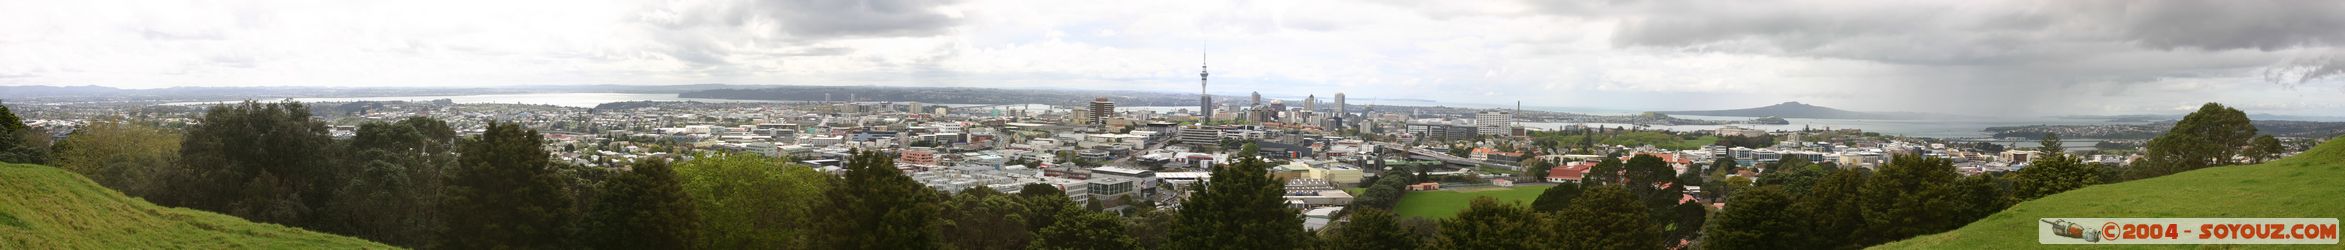 Auckland - Panorama from Mount Eden Domain
Mots-clés: New Zealand North Island coast to coast panorama